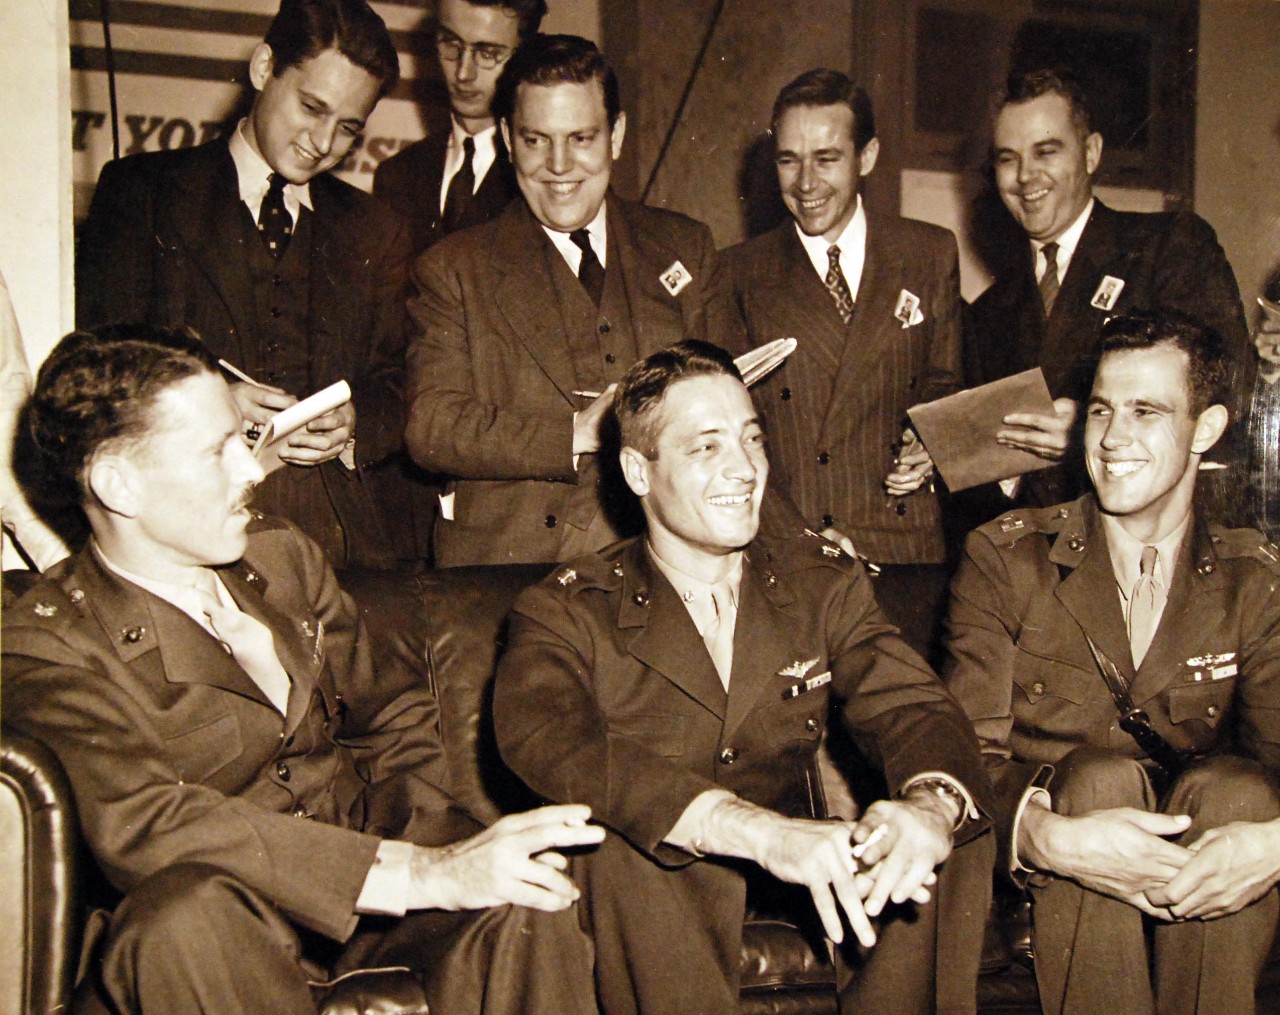 80-G-41220:  Lieutenant Colonel Richard C. Mangum, Major John L. Smith (Medal of Honor recipient), and Captain Marion R. Carl, all USMC, are seated left to right at a press conference in the Navy Department, Washington, D.C., shortly after their return from Guadalcanal, May 1943.  Smith received the Medal of Honor for his actions during August 21 to September 15, when he shot down 16 enemy planes, contributing to Japan’s inability to drive U.S. forces from Guadalcanal.   .   Official U.S. Navy photograph, now in the collections of the National Archives.    (2014/6/12).